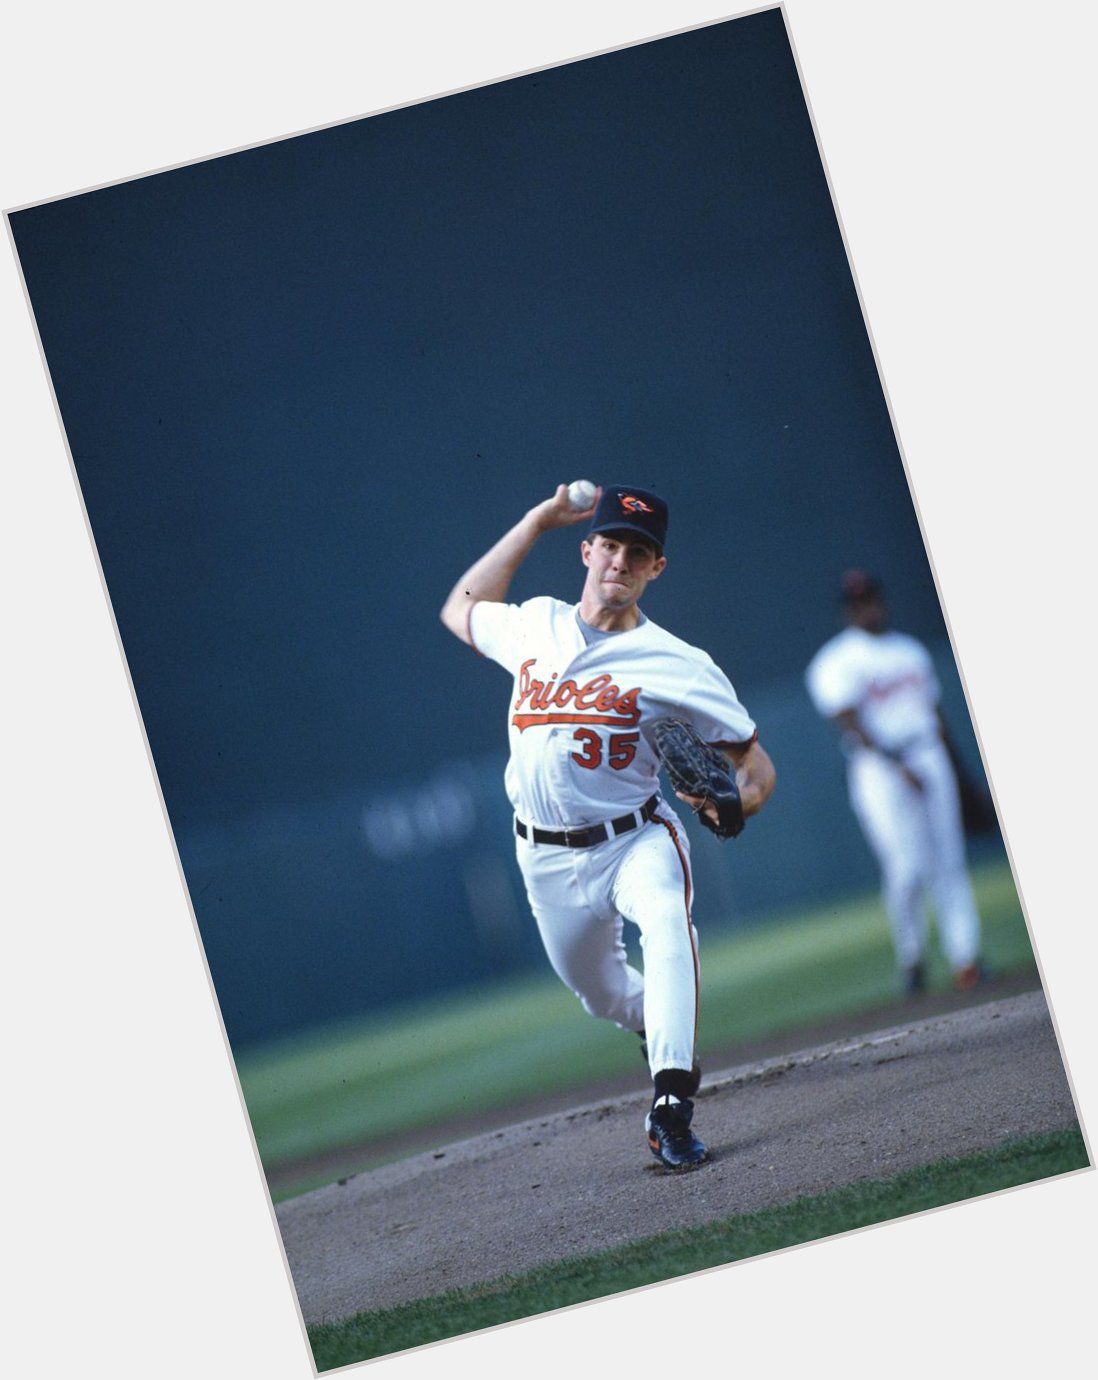 Happy 49th Birthday to Hall of Famer, Mike Mussina! 